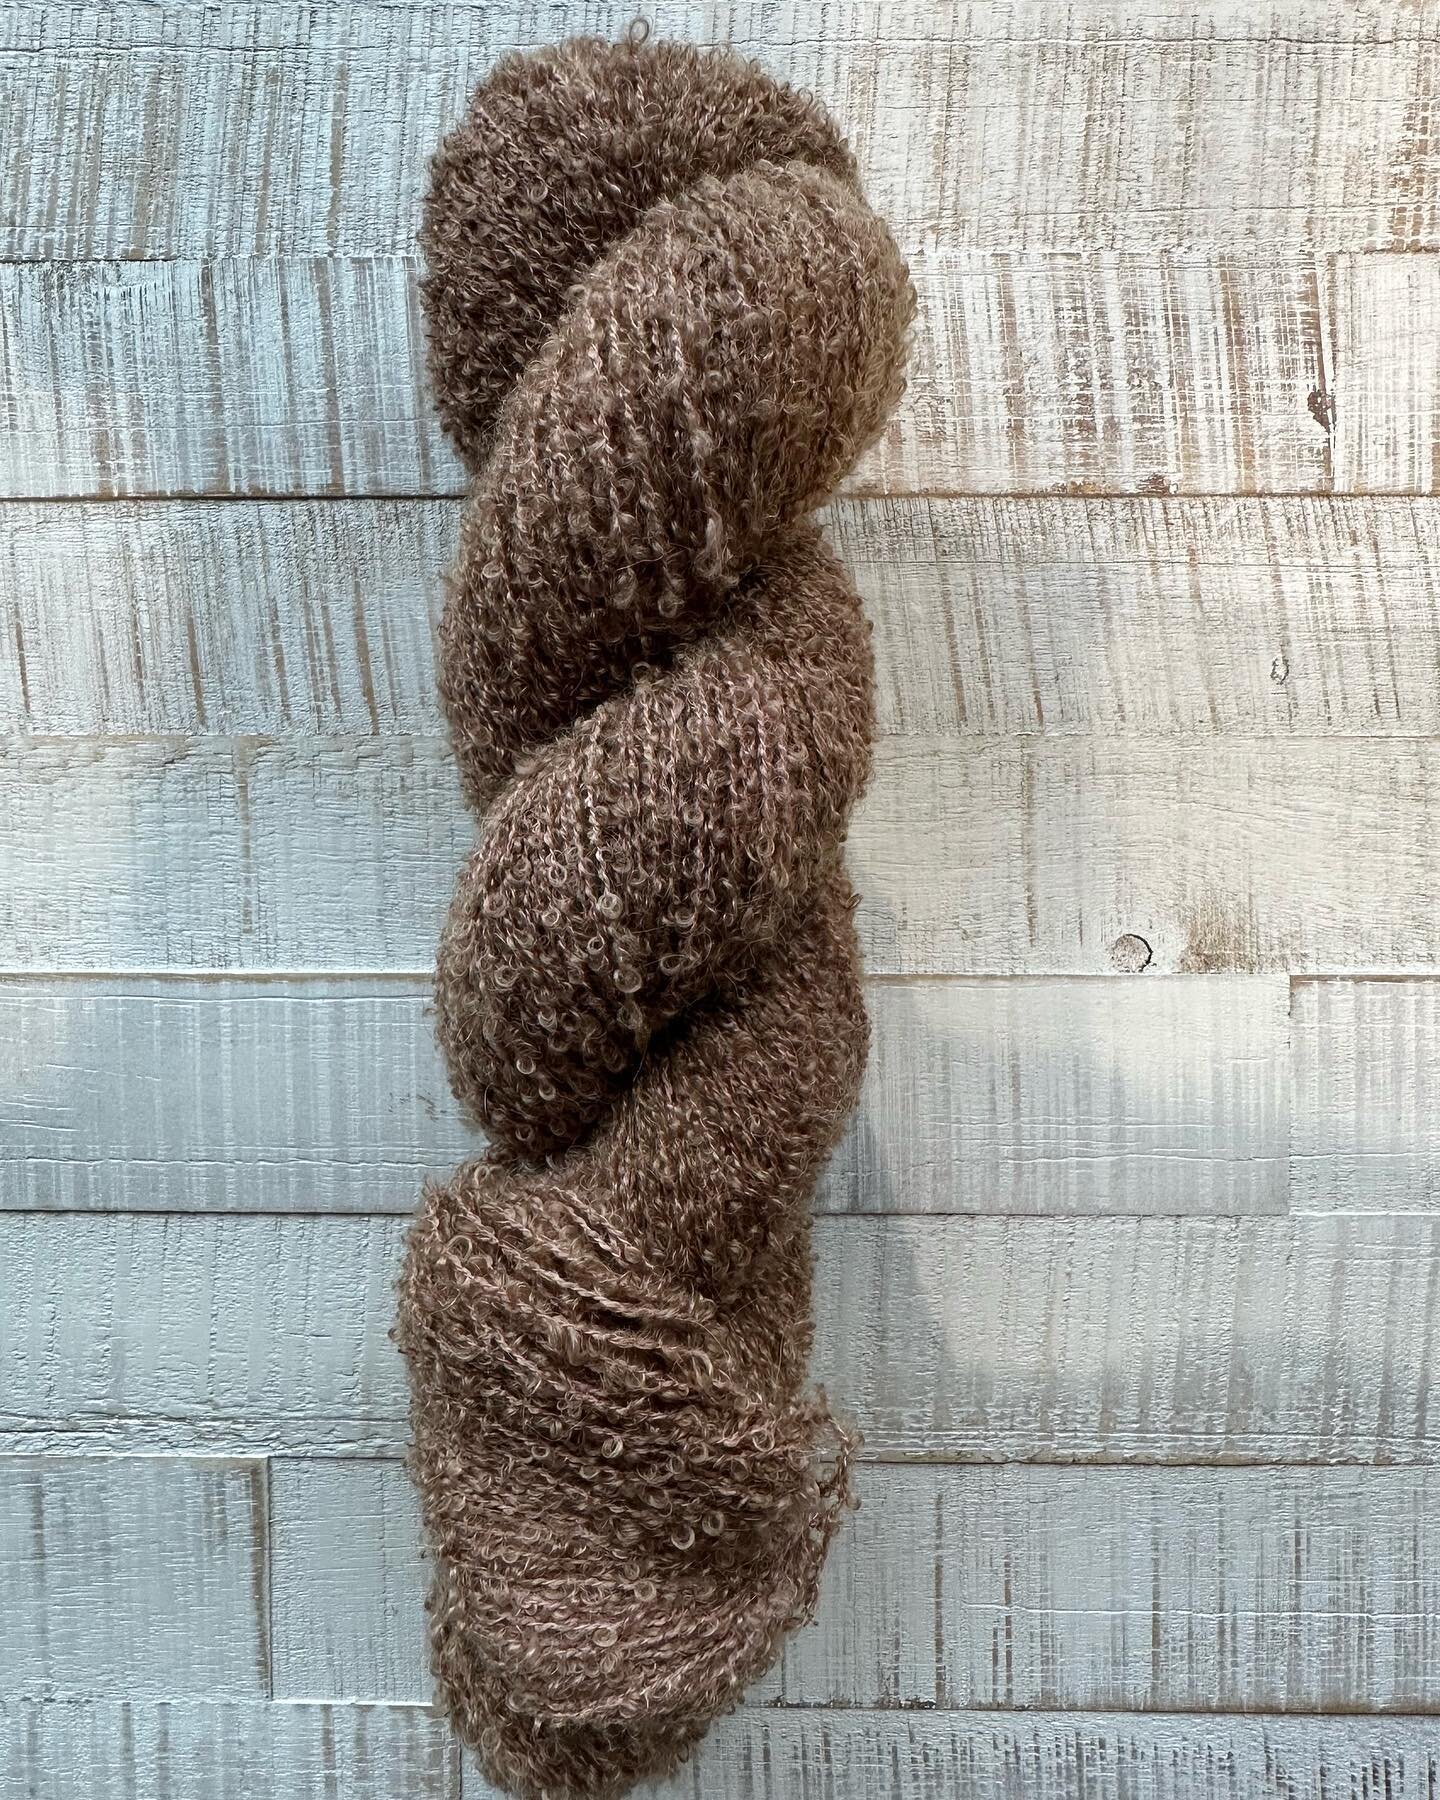 Happy Monday! Something new is in the shop&hellip;meet Bouclandia!
This beauty is 77% Baby Alpaca + 23% Silk at 400m per 100g.
Custom orders at this time for this base unless I throw in some here and there in the dye pots, but let me know what color 